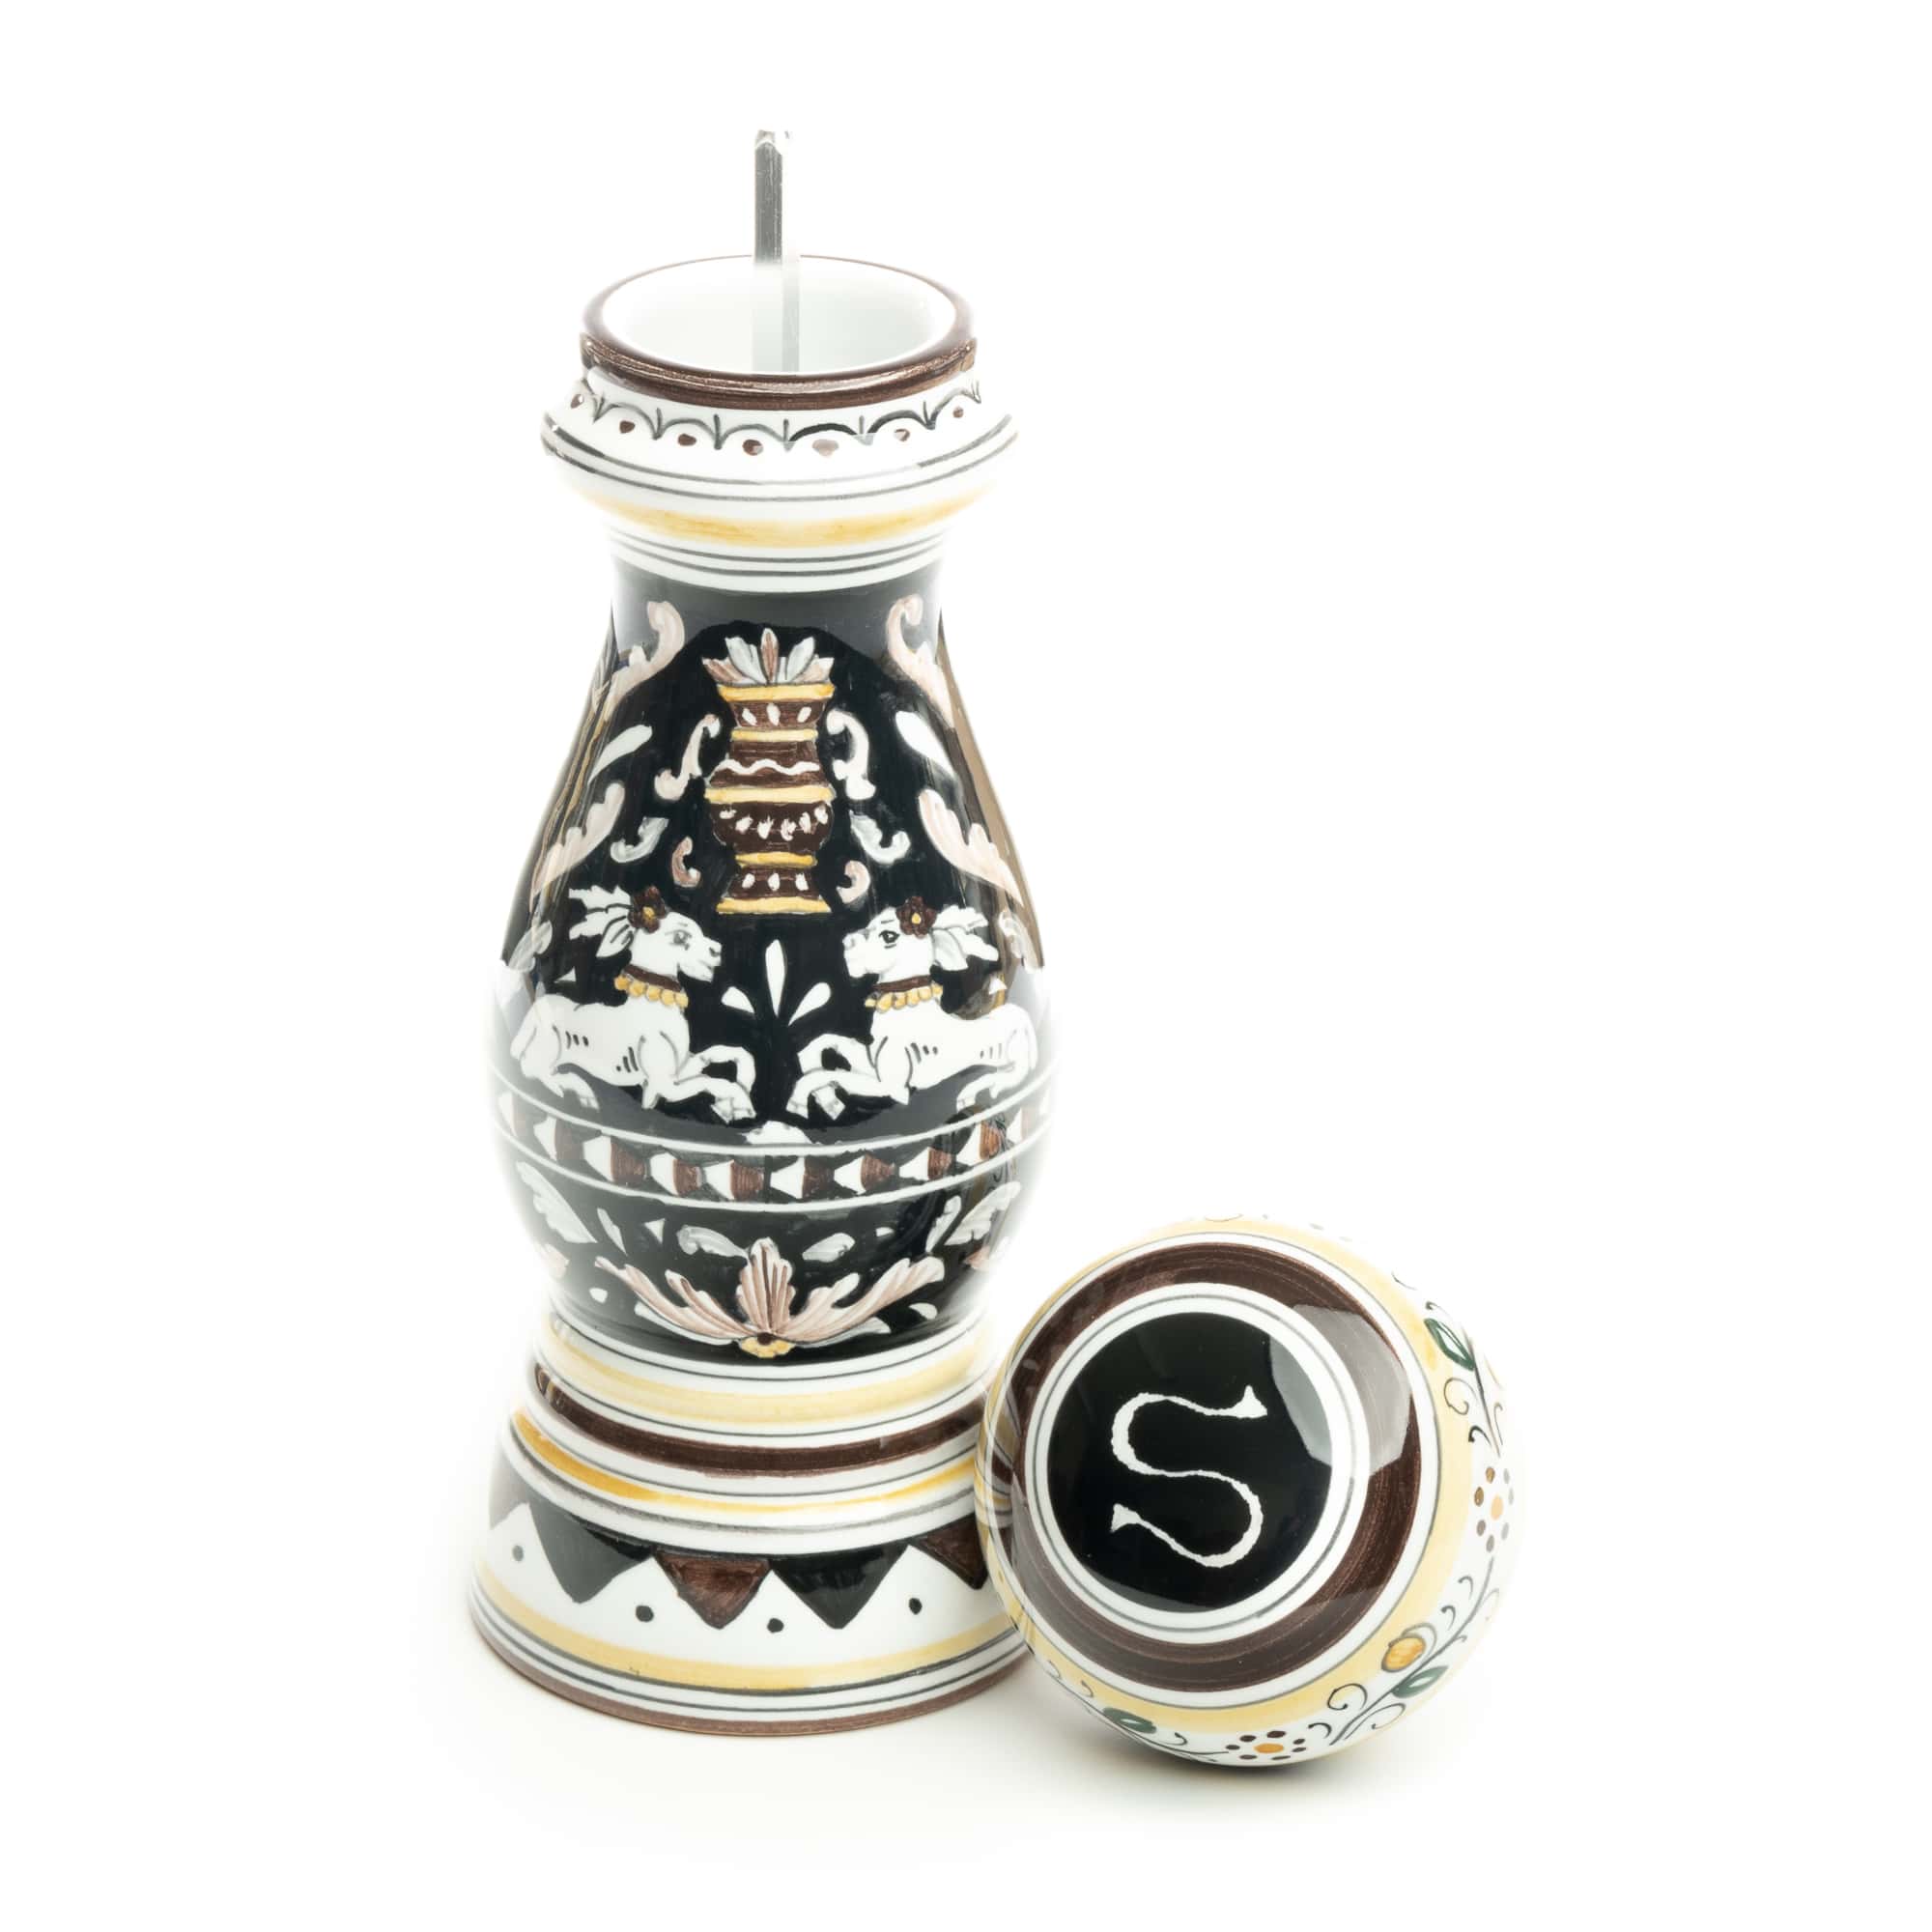 Siena - Salt Grinder, ceramics, pottery, italian design, majolica, handmade, handcrafted, handpainted, home decor, kitchen art, home goods, deruta, majolica, Artisan, treasures, traditional art, modern art, gift ideas, style, SF, shop small business, artists, shop online, landmark store, legacy, one of a kind, limited edition, gift guide, gift shop, retail shop, decorations, shopping, italy, home staging, home decorating, home interiors